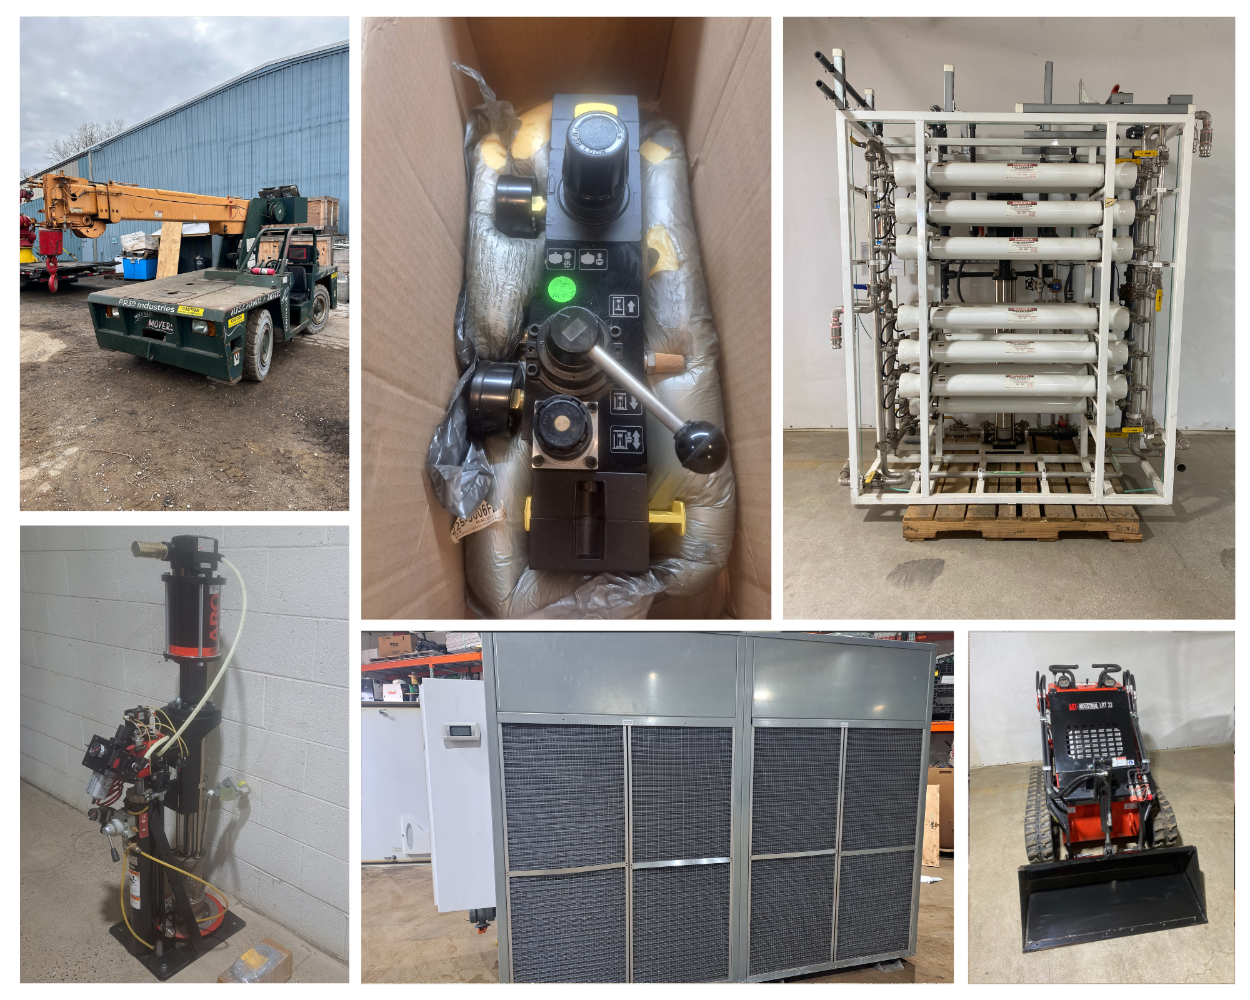 DAY 1 - LARGE SELECTION OF NEW AND USED INDUSTRIAL AUTOMATION AND MRO ITEMS, PNEUMATICS, ELECTRICAL , LASERS, WELDERS, CHILLERS, AND MUCH MORE